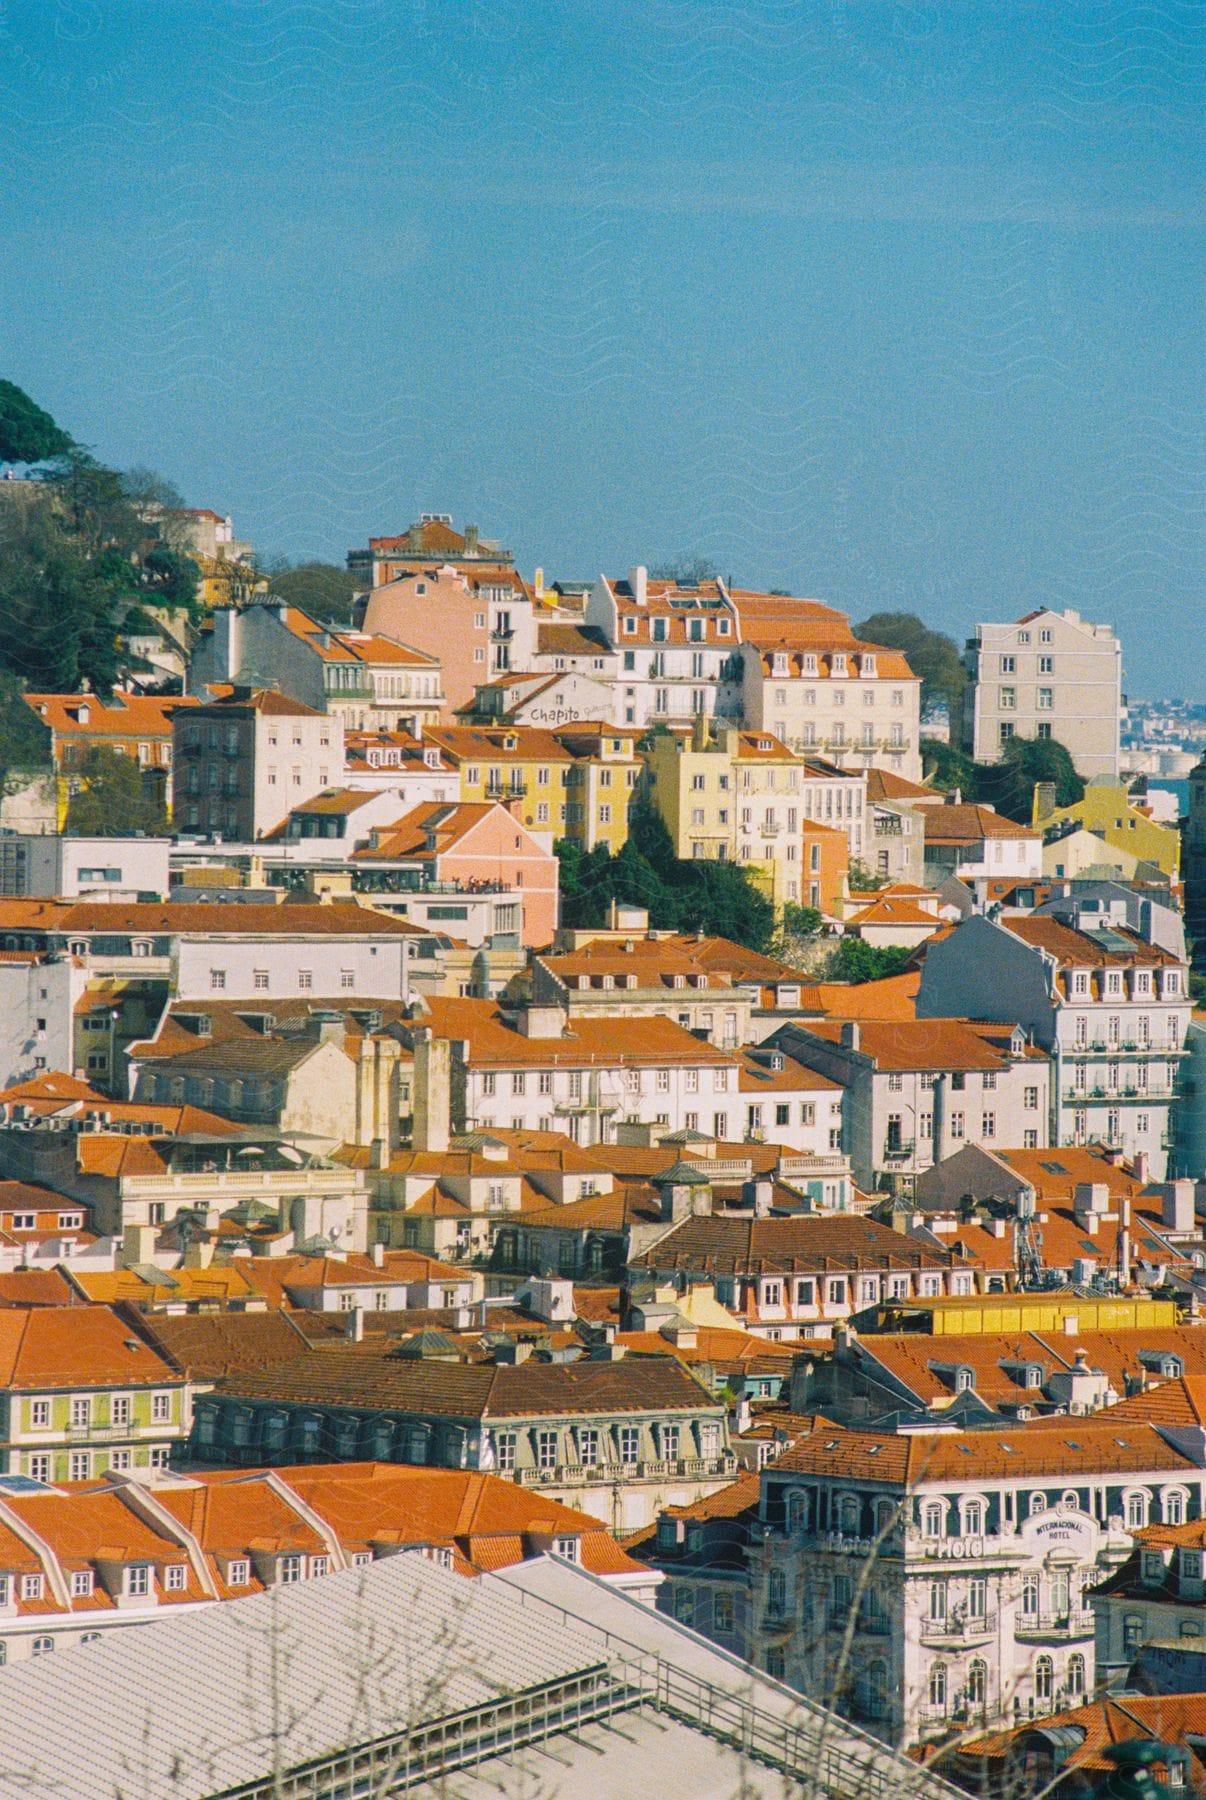 A group of tightly packed older buildings with red roofs on a sloping hill under a blue sky